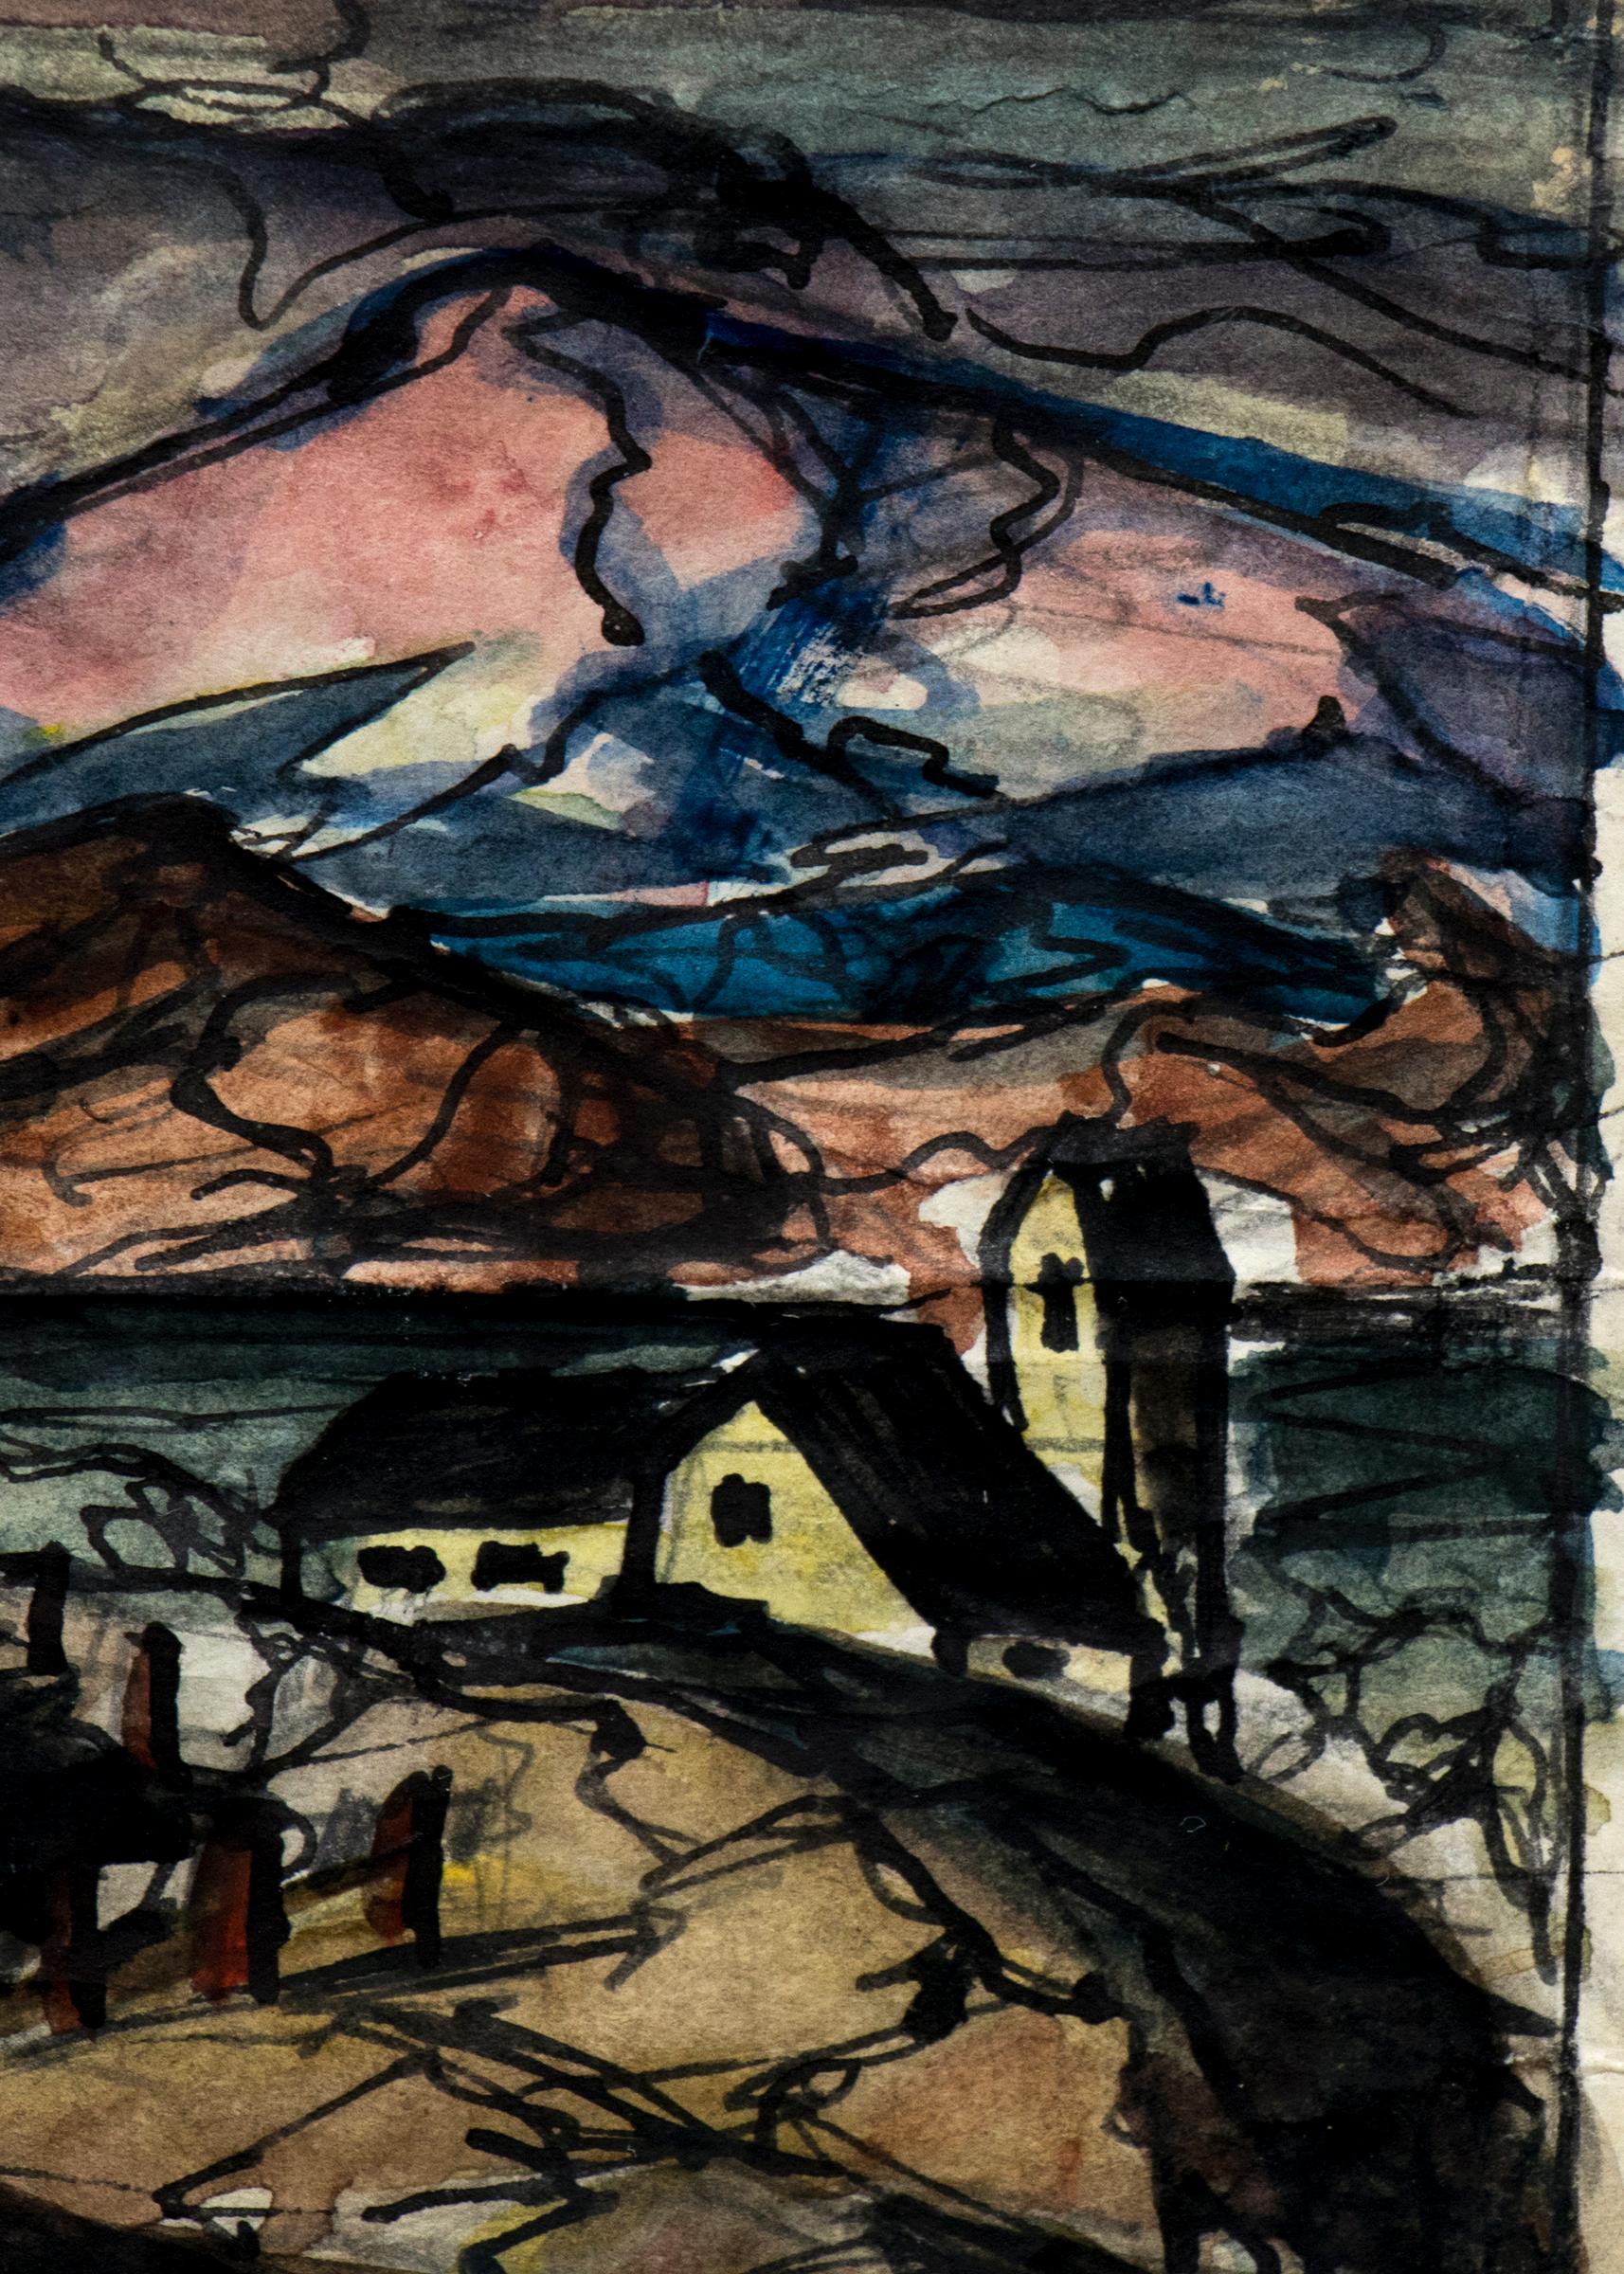 Original signed watercolor on paper painting by Charles Ragland Bunnell from 1940 of Cripple Creek or Victor Mine located in Colorado. Mine buildings with mountains in the background painted in colors of blue, black, and brown. Presented in a custom